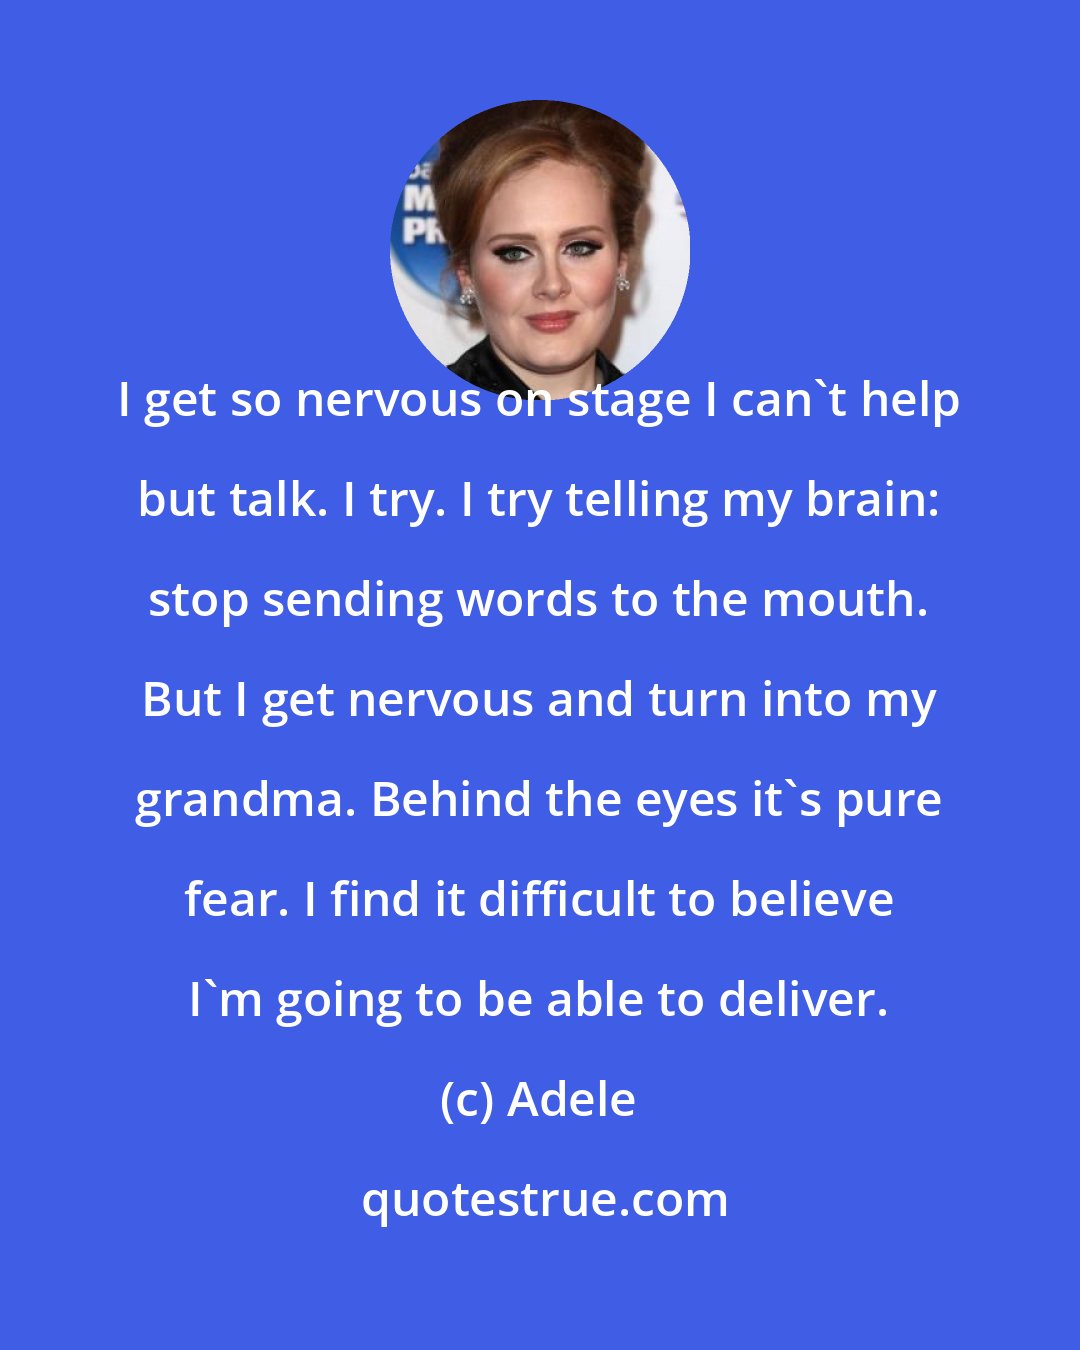 Adele: I get so nervous on stage I can't help but talk. I try. I try telling my brain: stop sending words to the mouth. But I get nervous and turn into my grandma. Behind the eyes it's pure fear. I find it difficult to believe I'm going to be able to deliver.